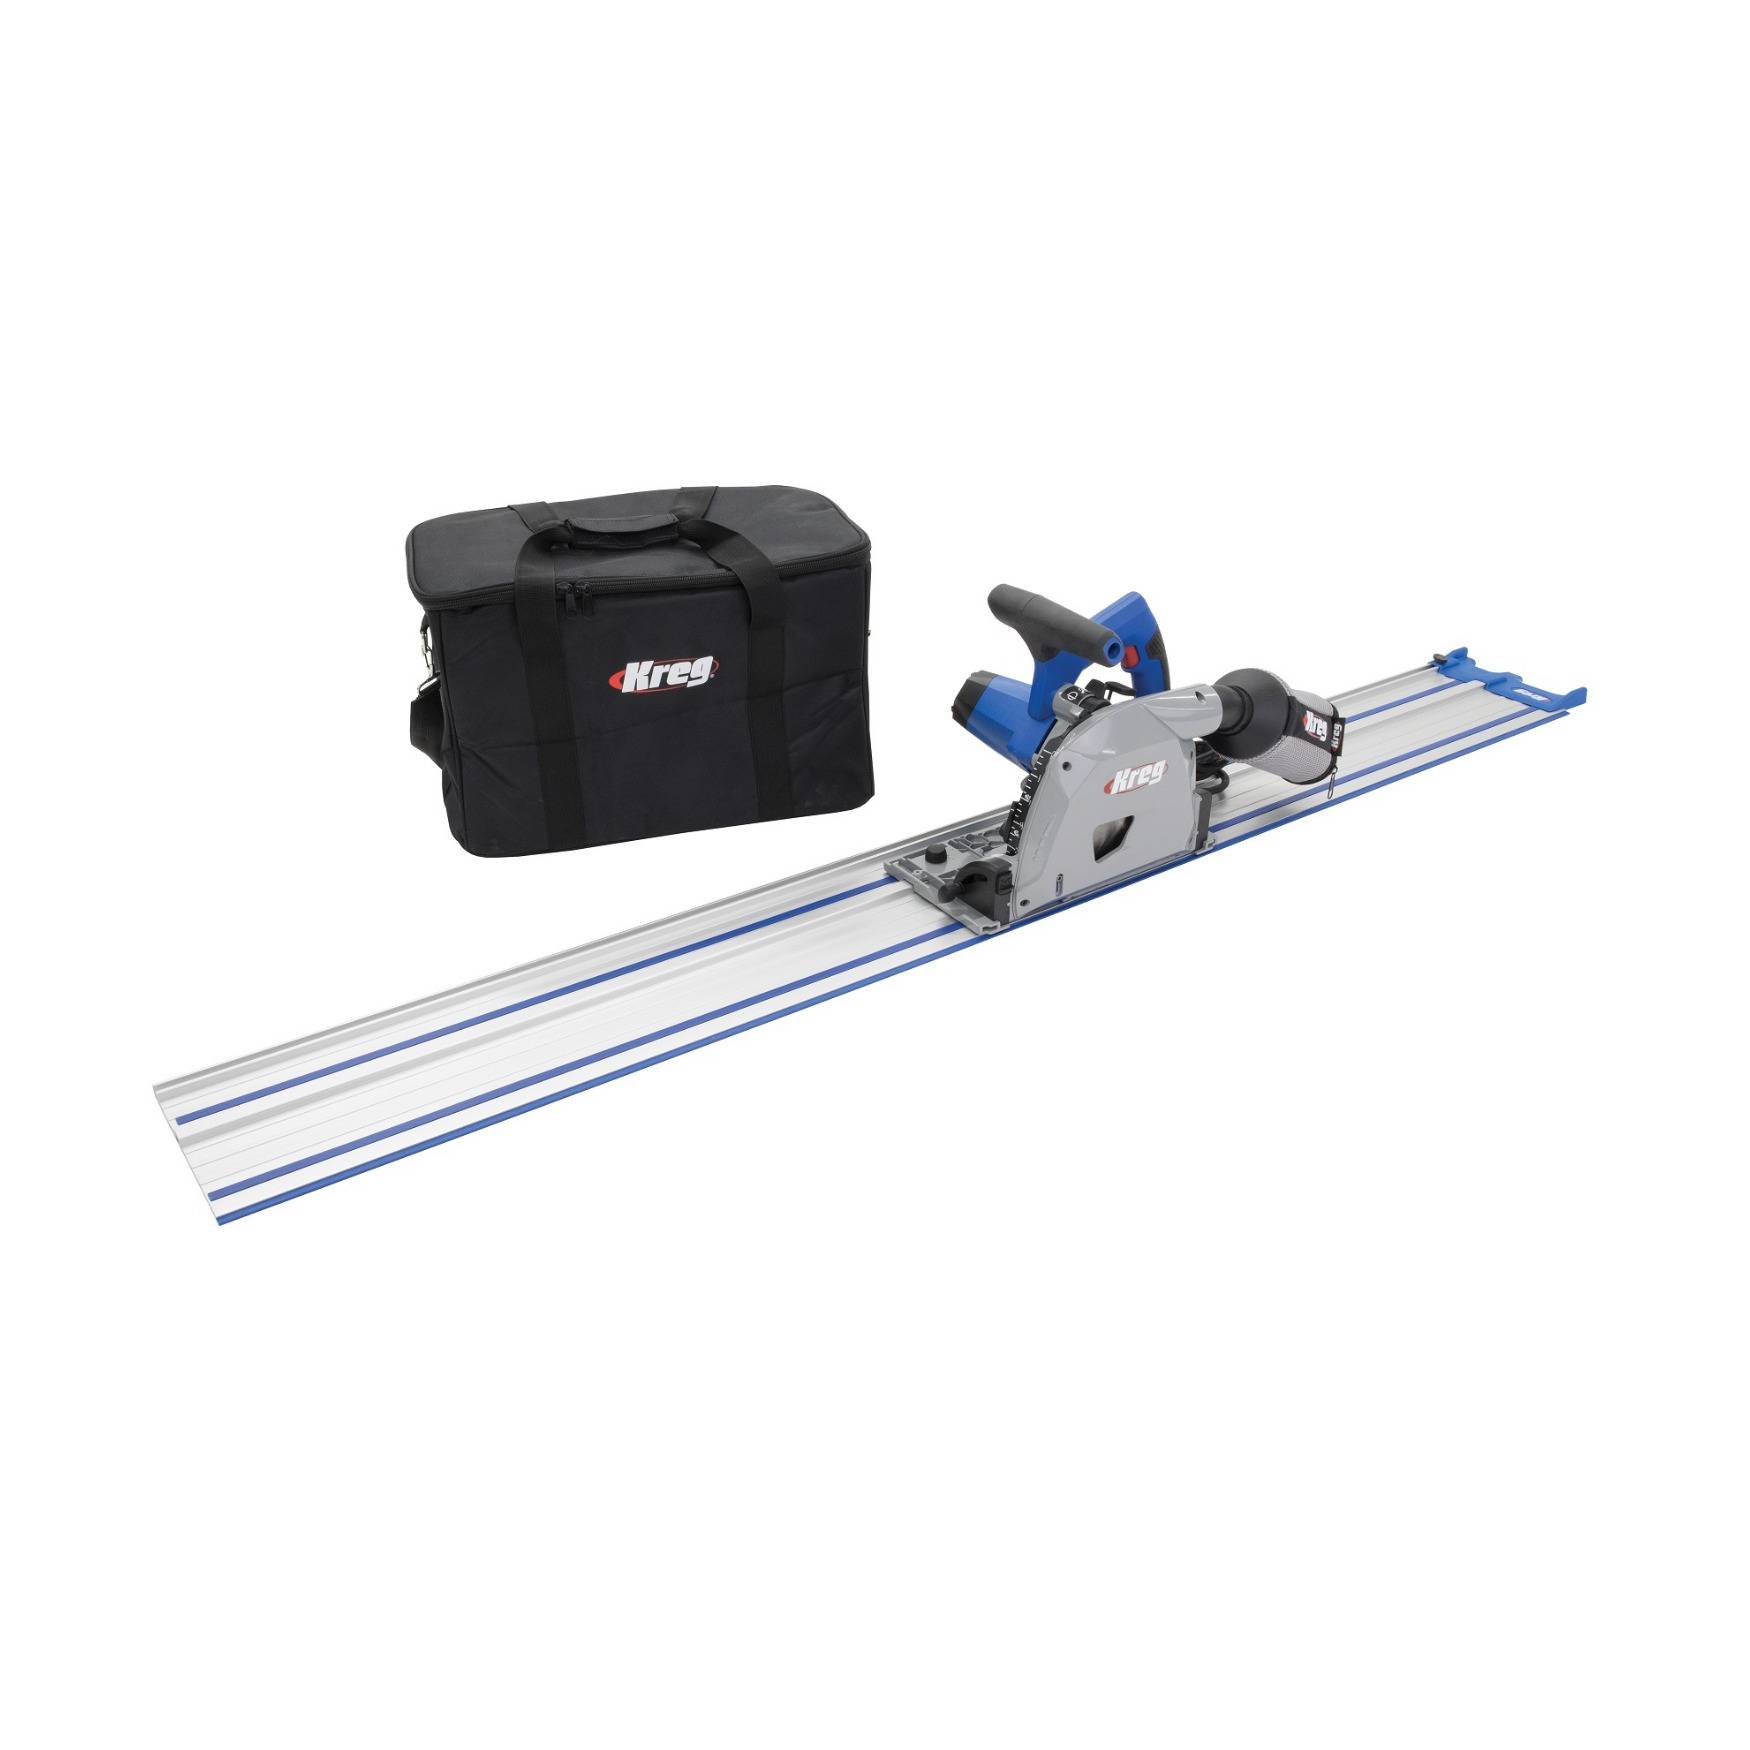 Kreg Adaptive Cutting System Saw and Guide Track Kit